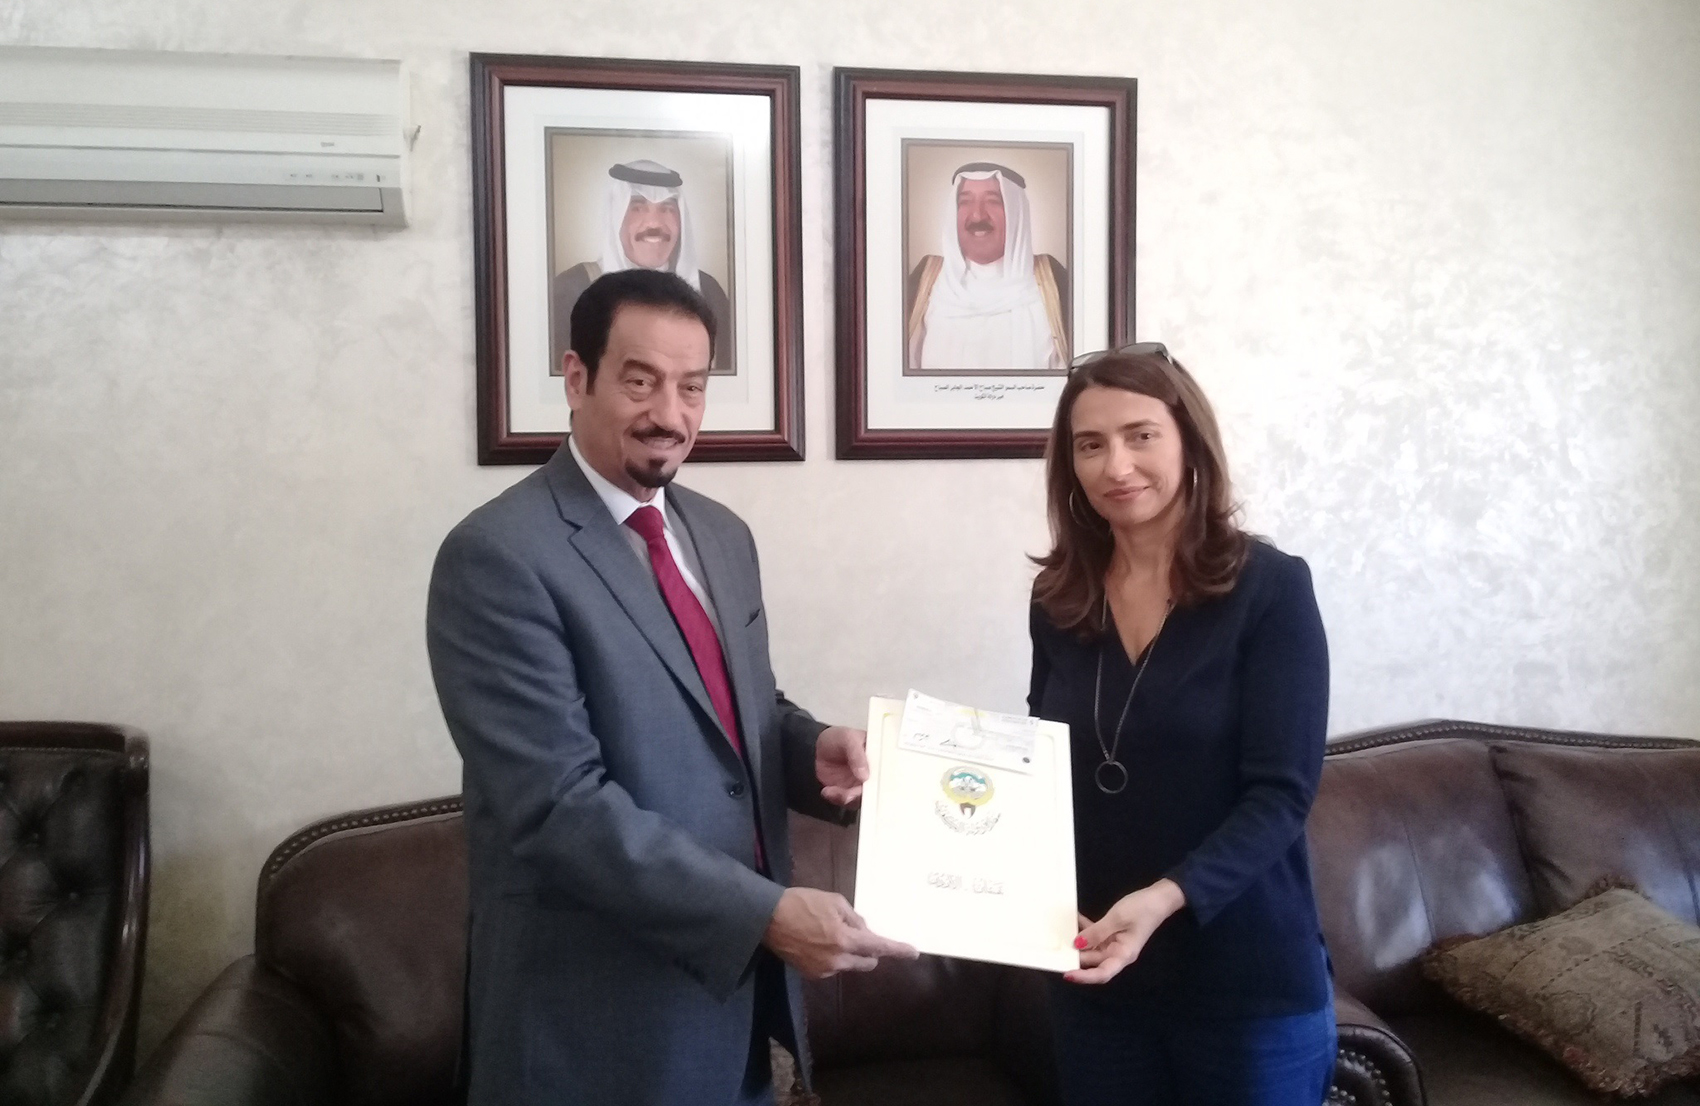 Kuwait's Ambassador to Jordan Dr. Hamad Al-Duaij hands the donation to the consultant to UNRWA's Director General Maria Mohammadi